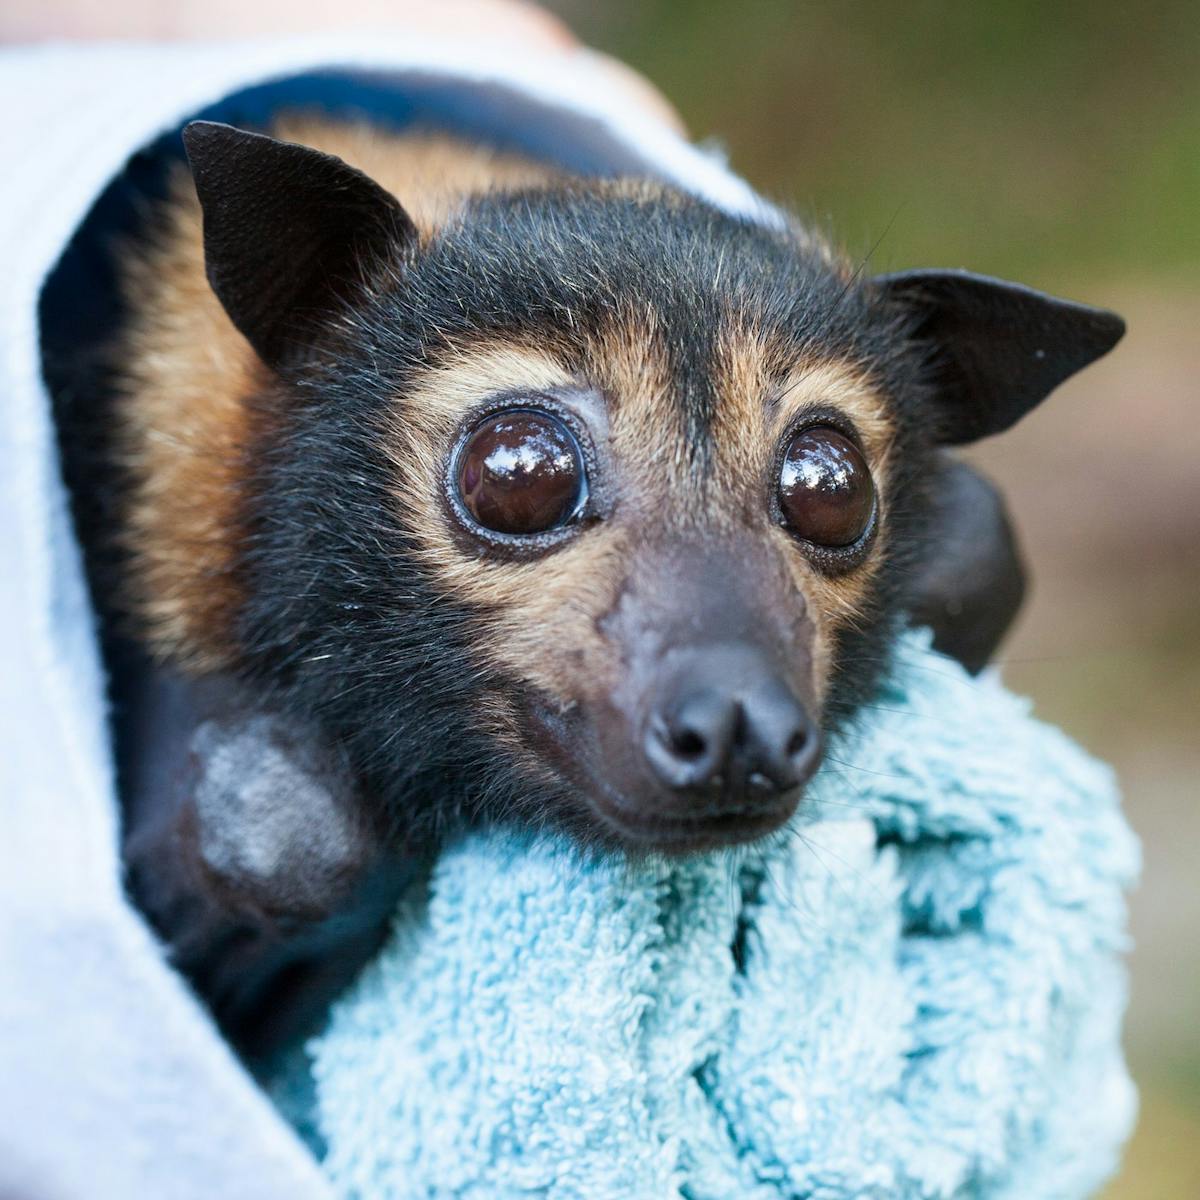 Manga Slapper af Hvert år Our laws failed these endangered flying-foxes at every turn. On Saturday,  Cairns council will put another nail in the coffin